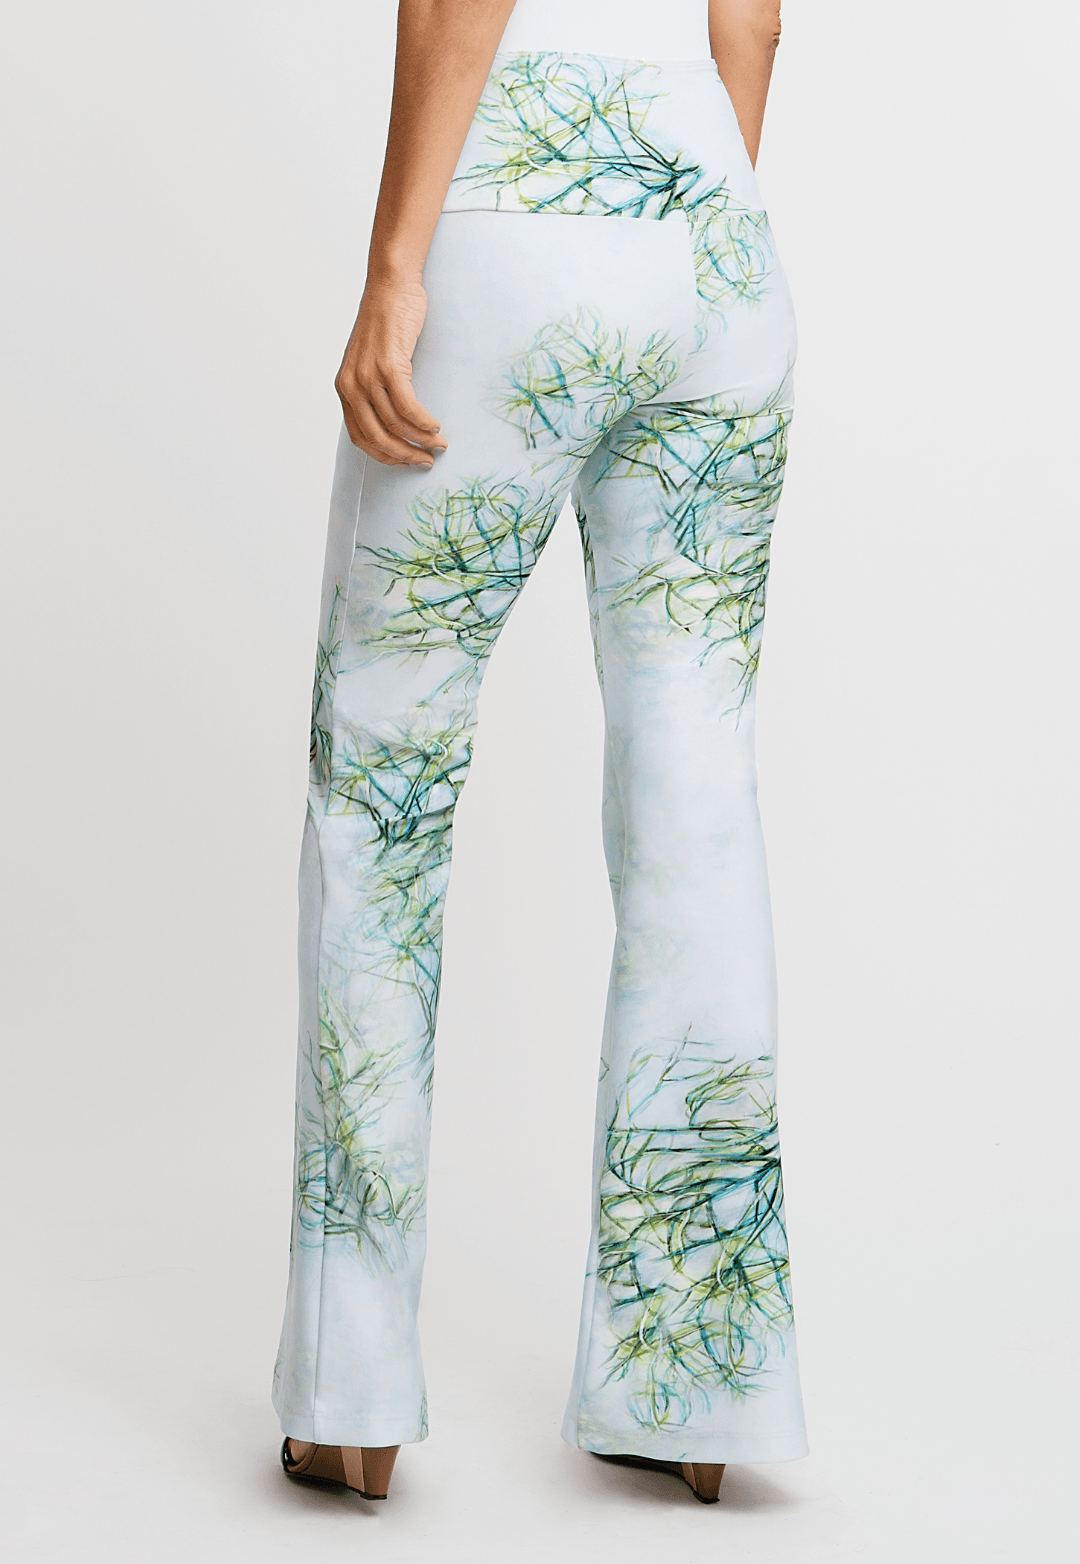 green cactus printed stretch knit pants